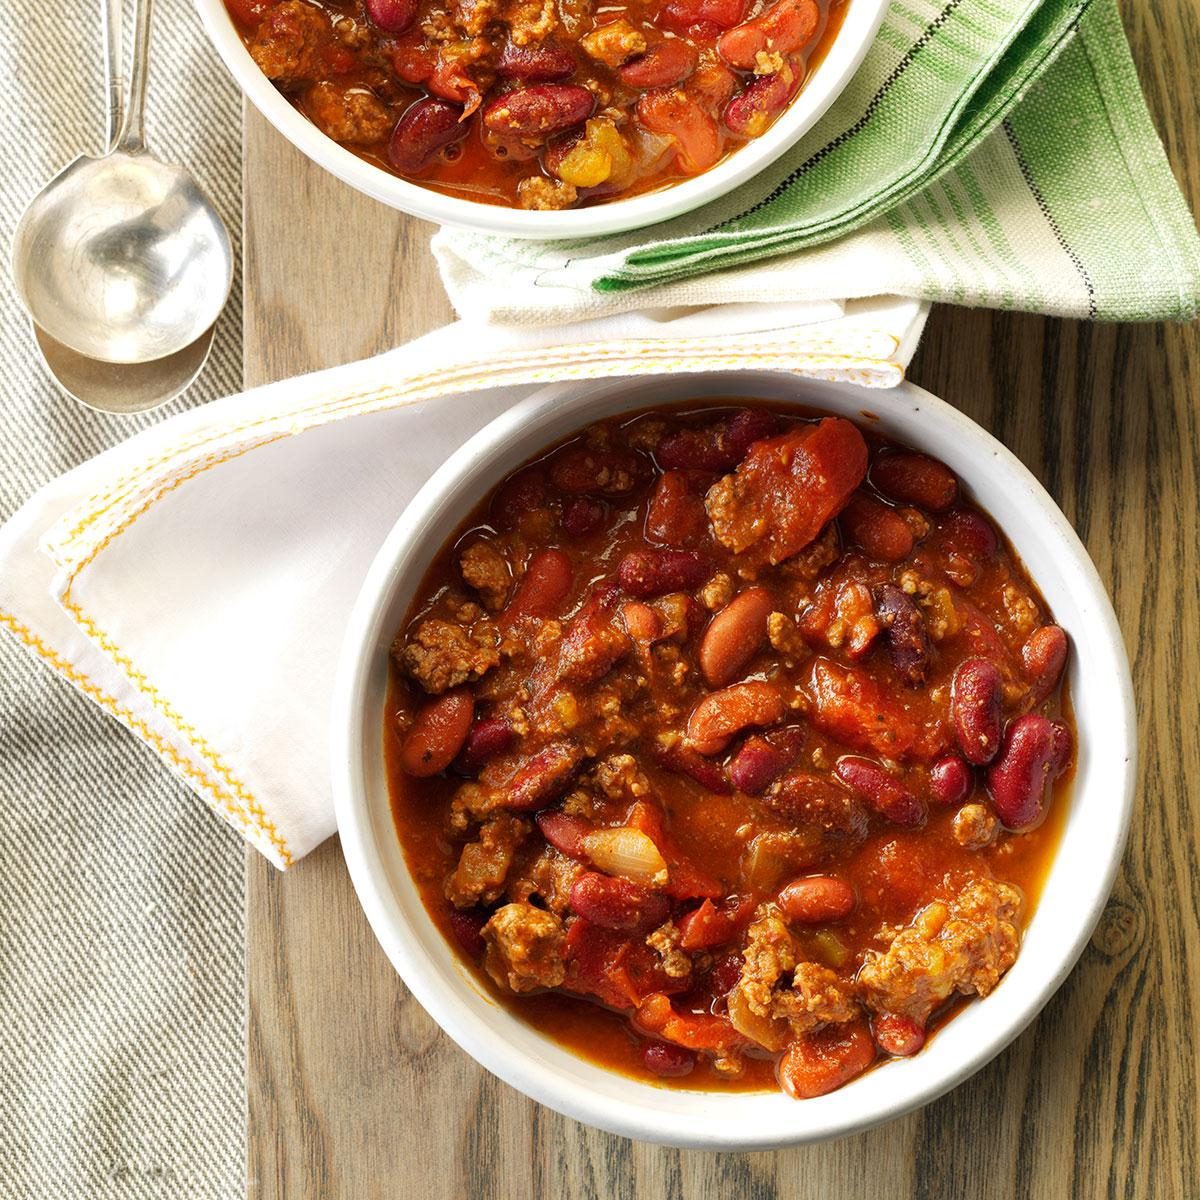 Sandy's Slow-Cooked Chili Recipe: How to Make It